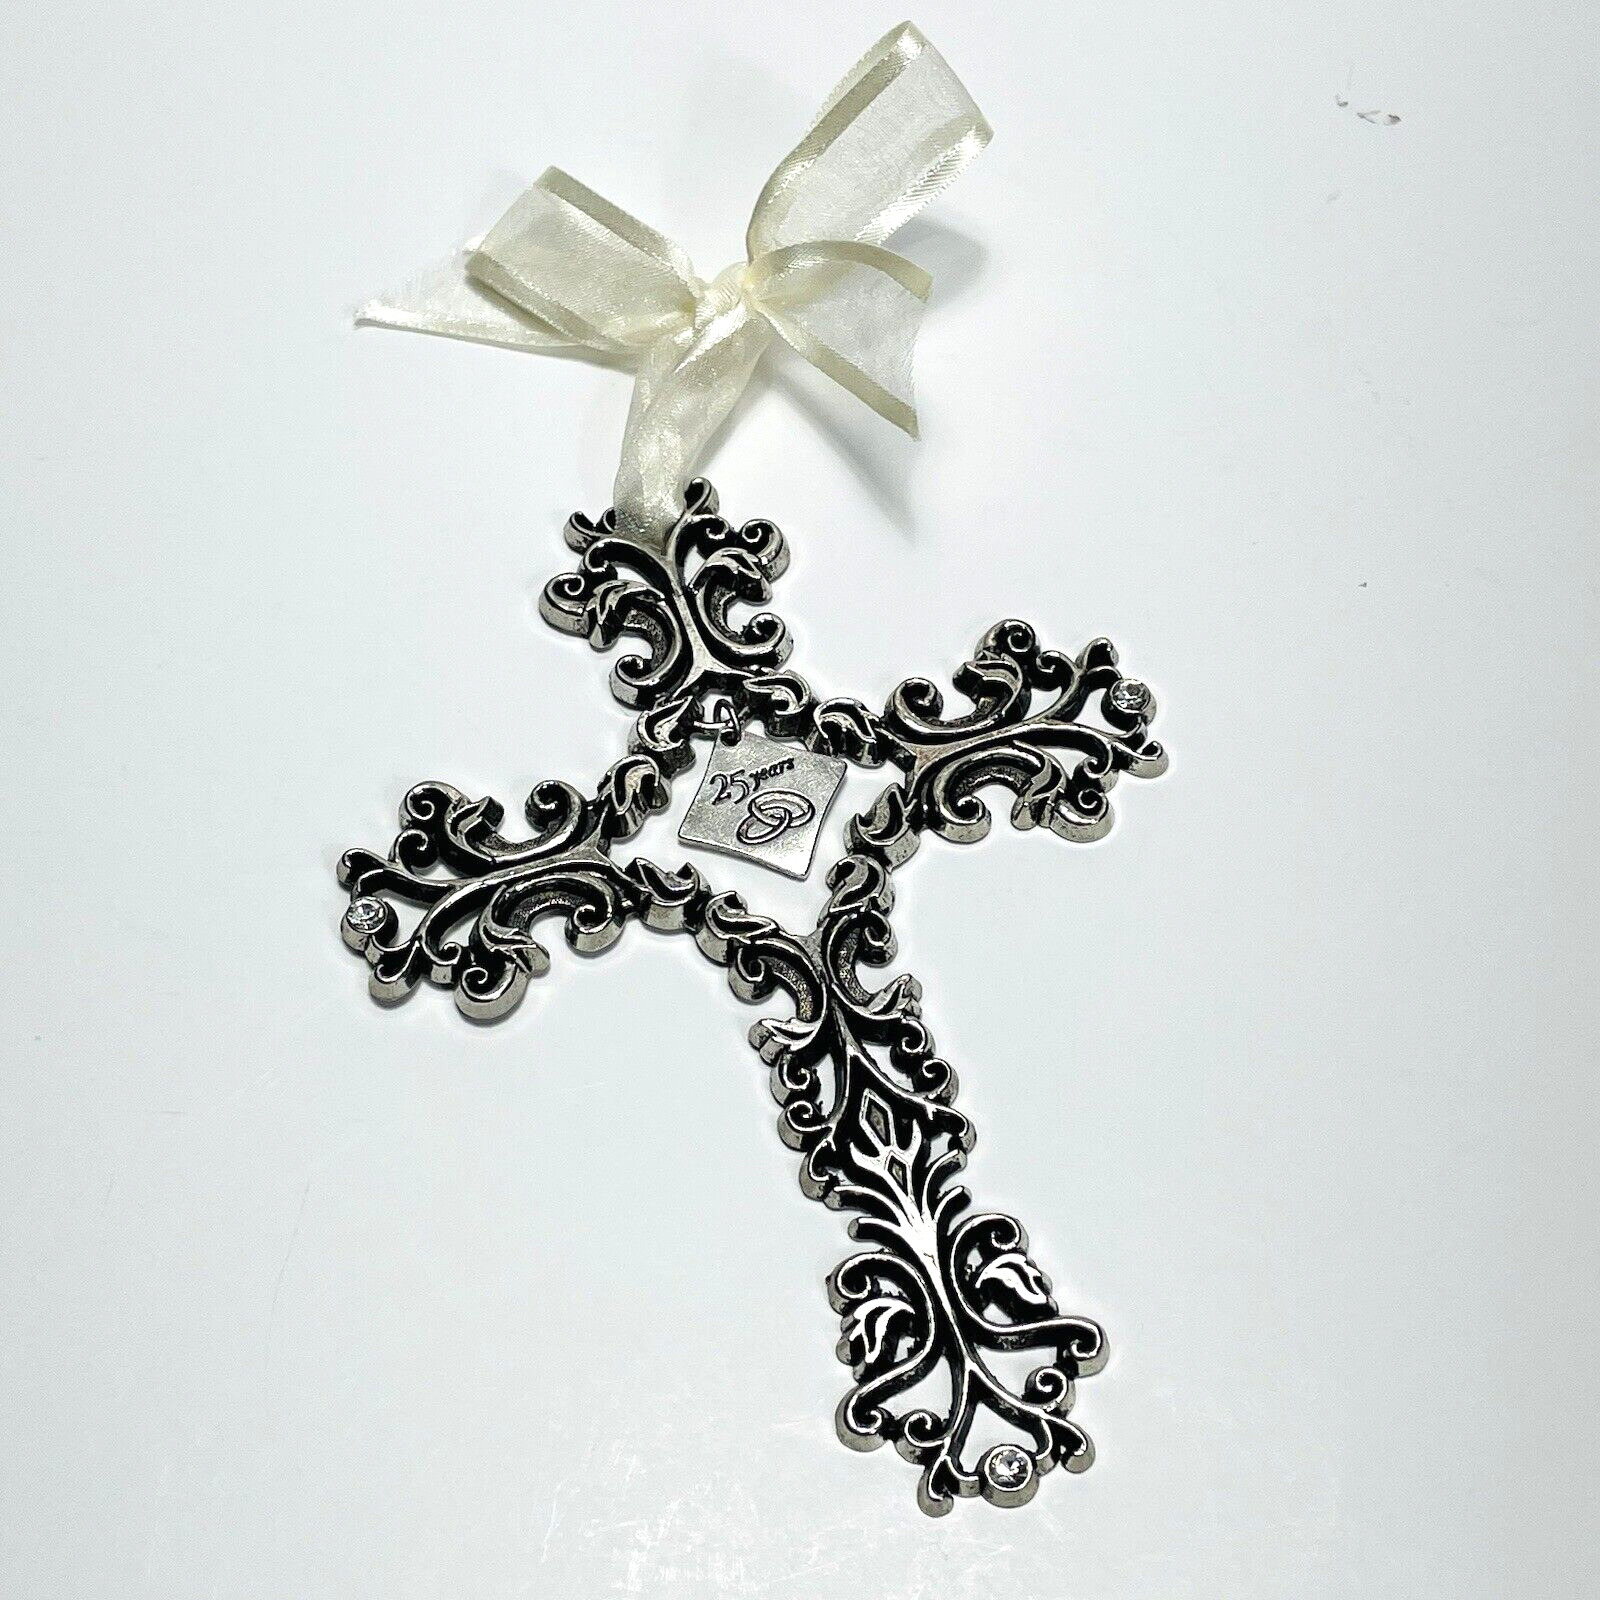 Pewter 25 Year Anniversary Cross Crucifix Christmas Ornament by Camco